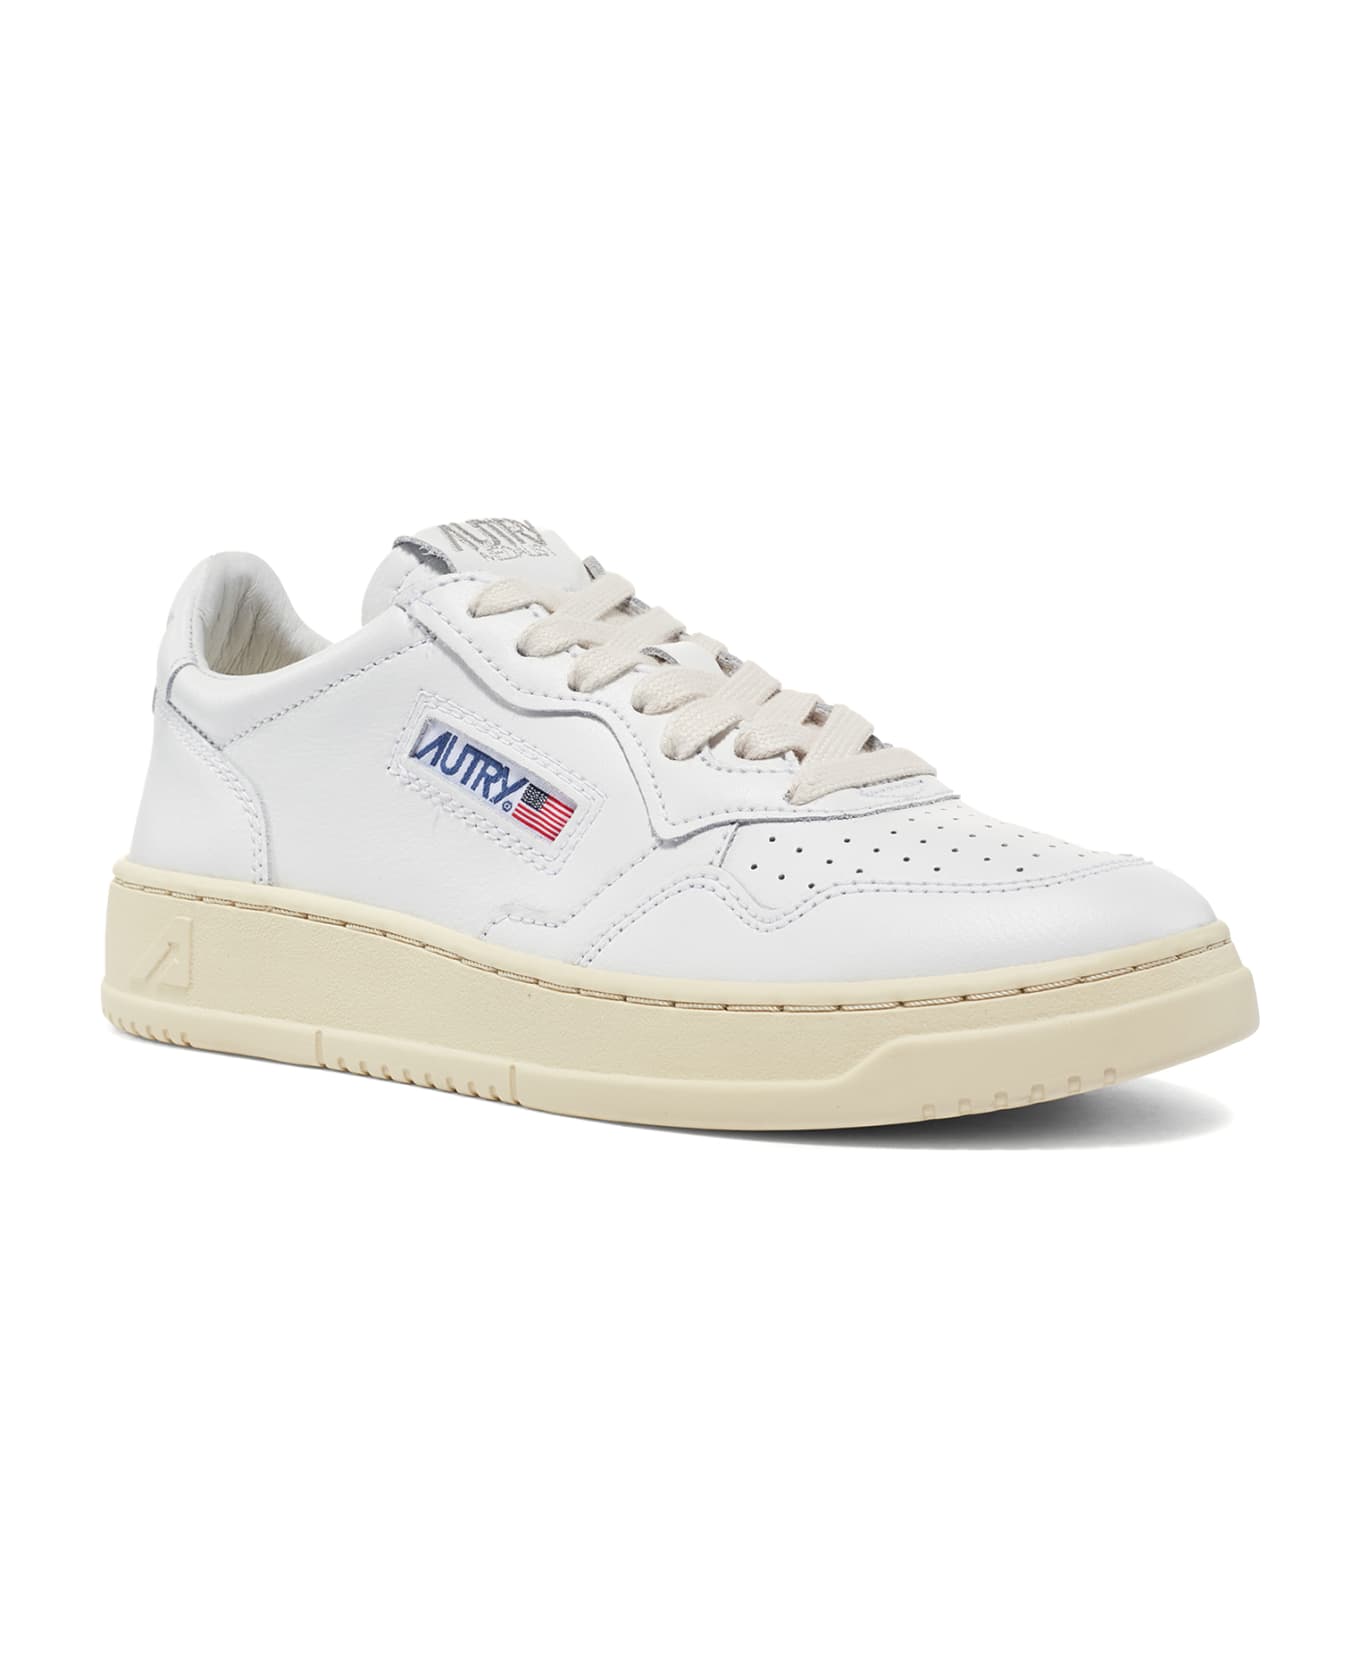 Autry White Medalist Sneakers - WHITE